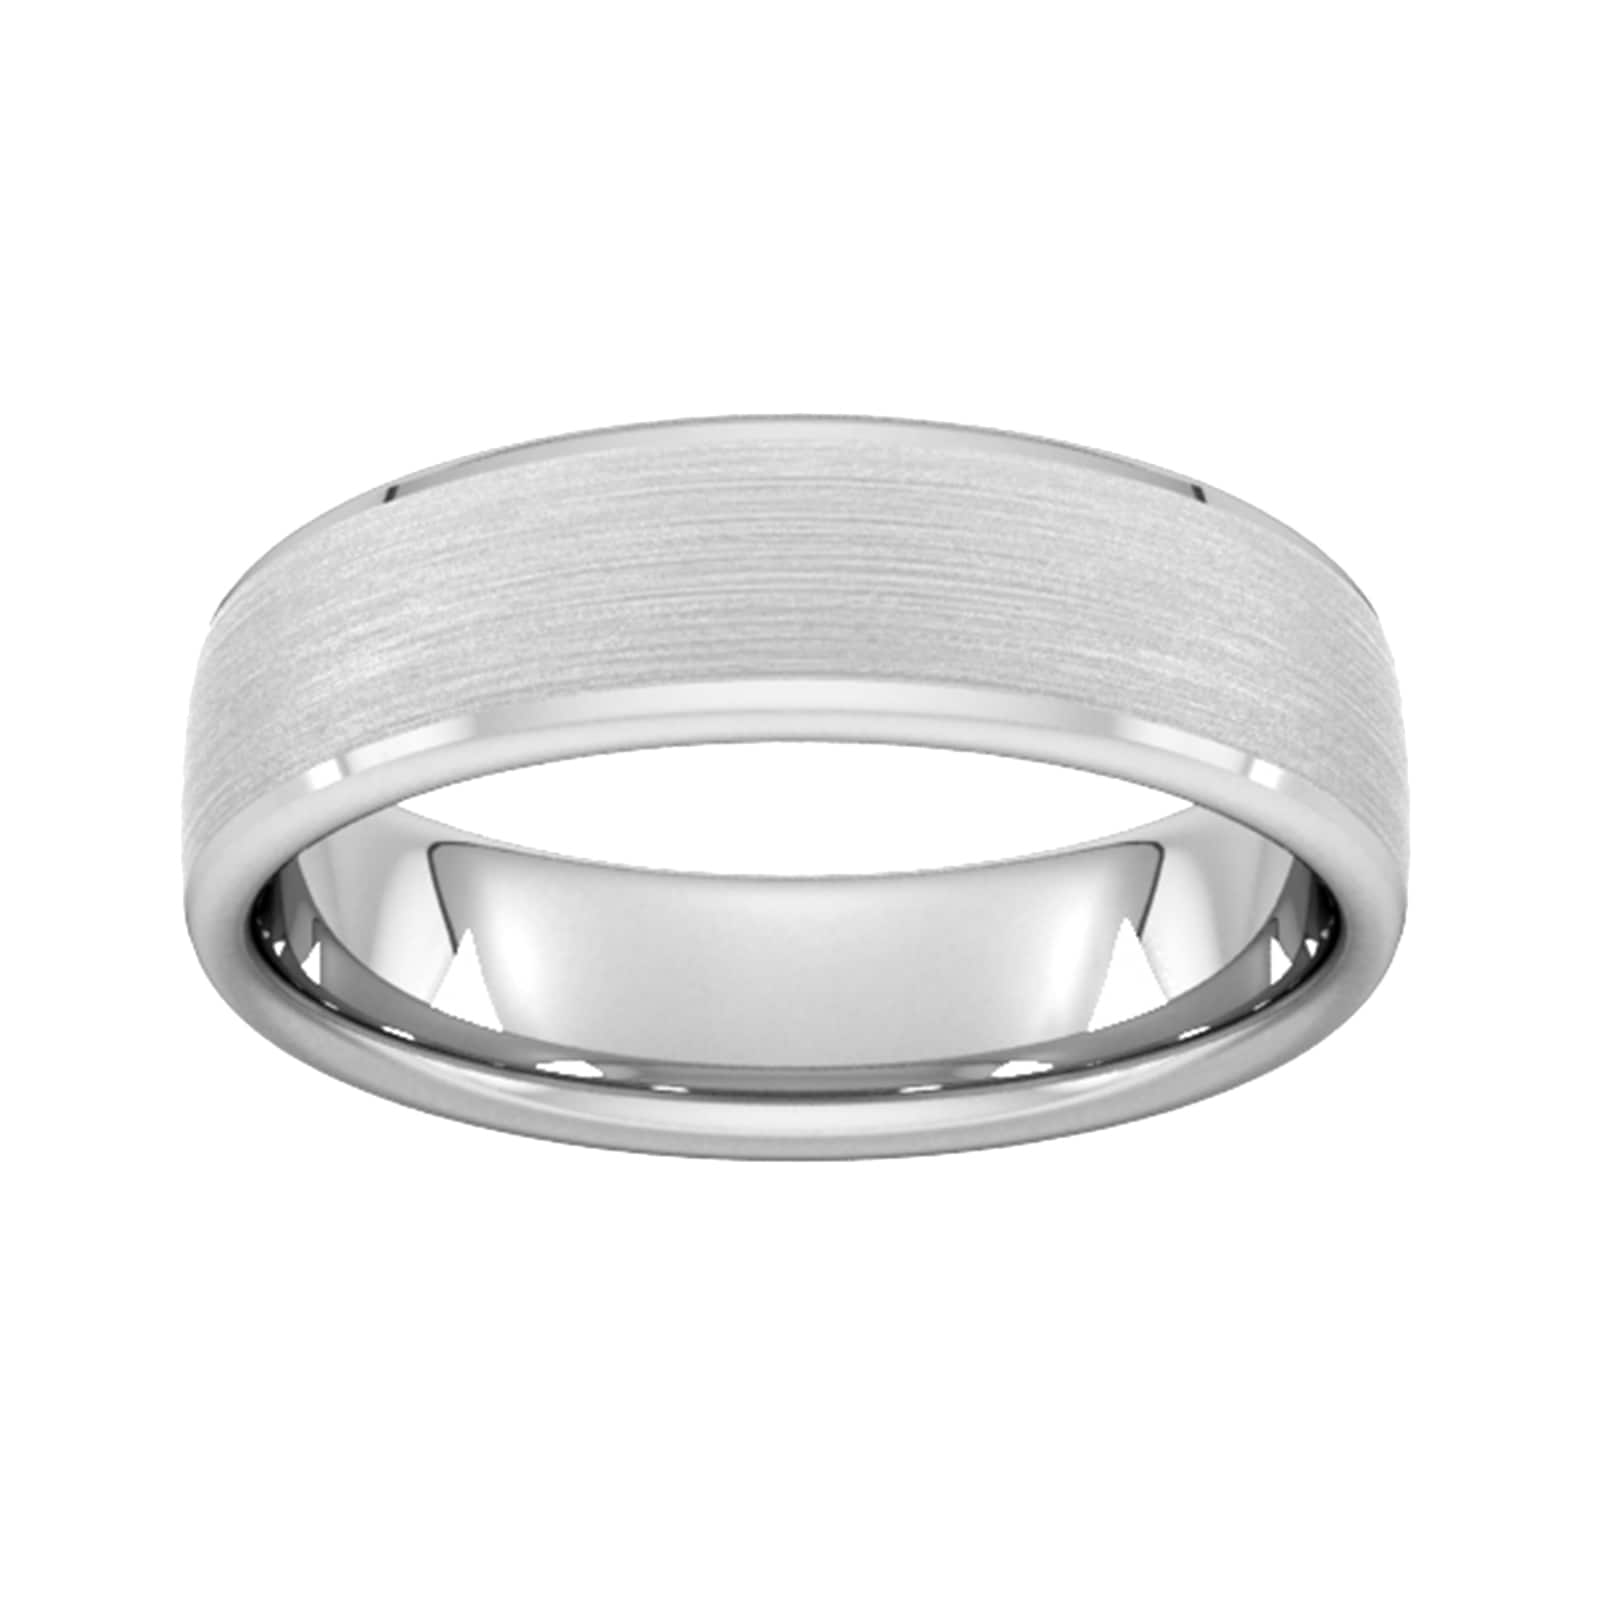 6mm D Shape Standard Polished Chamfered Edges With Matt Centre Wedding Ring In 18 Carat White Gold - Ring Size S